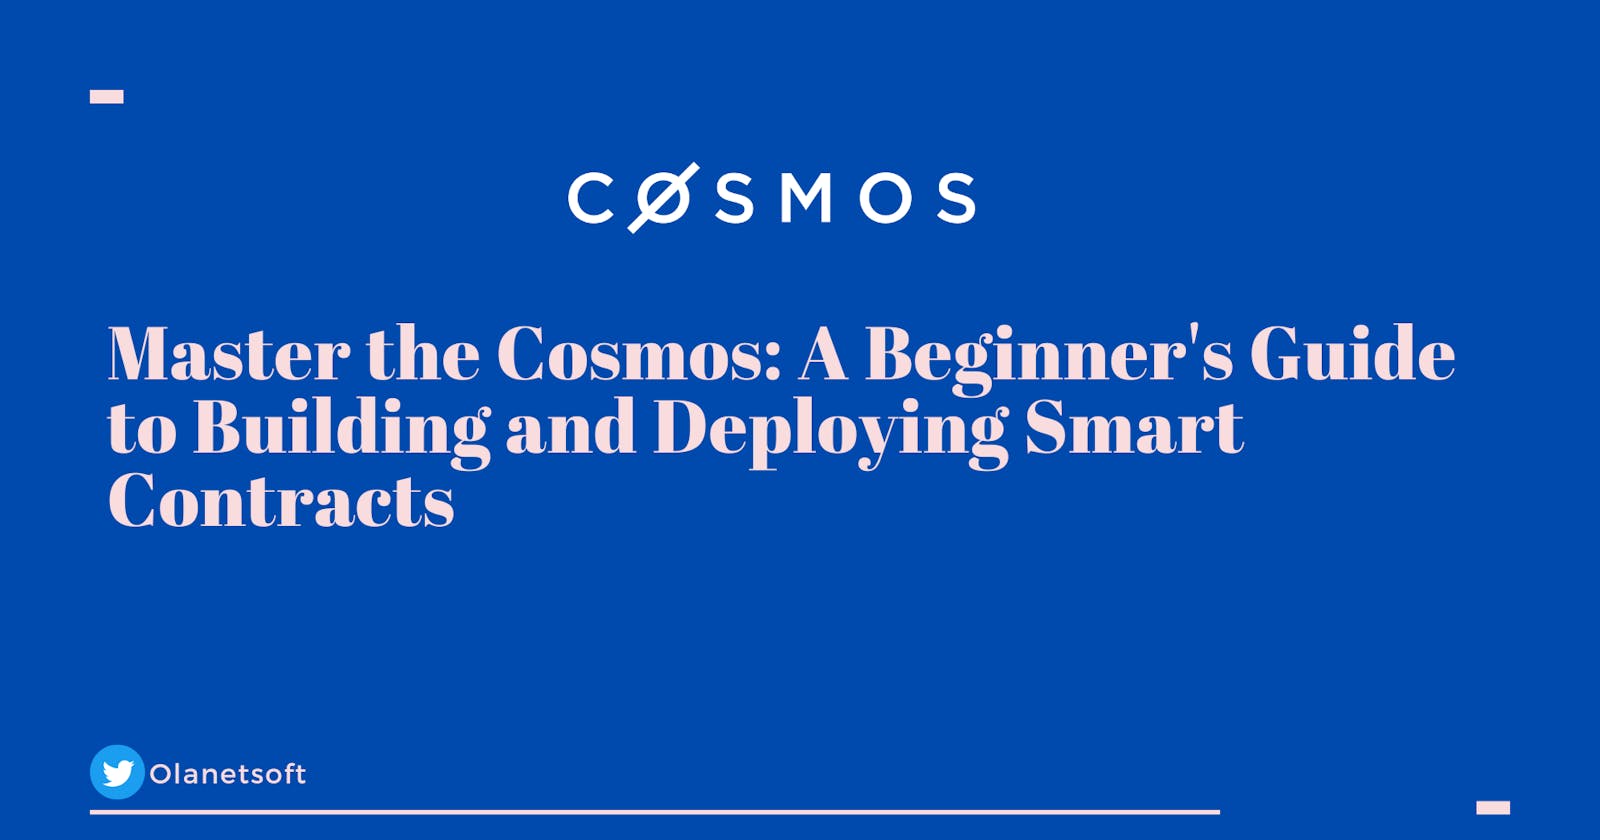 Master the Cosmos: A Beginner's Guide to Building and Deploying Smart Contracts